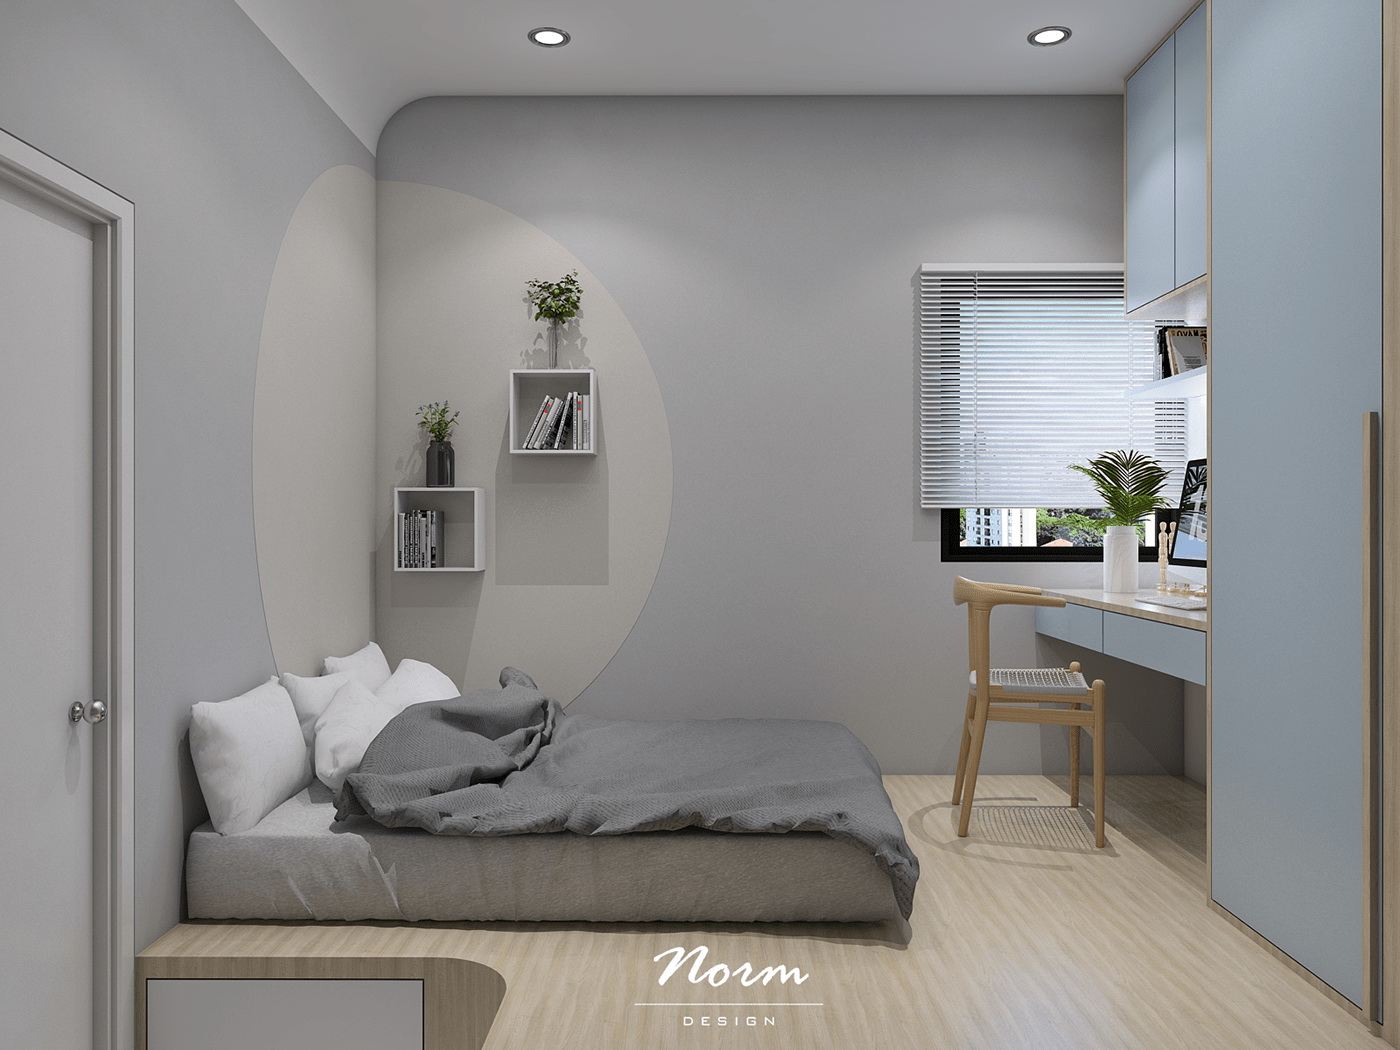 The main colors in this room are gray and pastel blue, with multi-purpose furniture such as wall shelves and high-rise cabinets to save space and add to the delicate beauty.